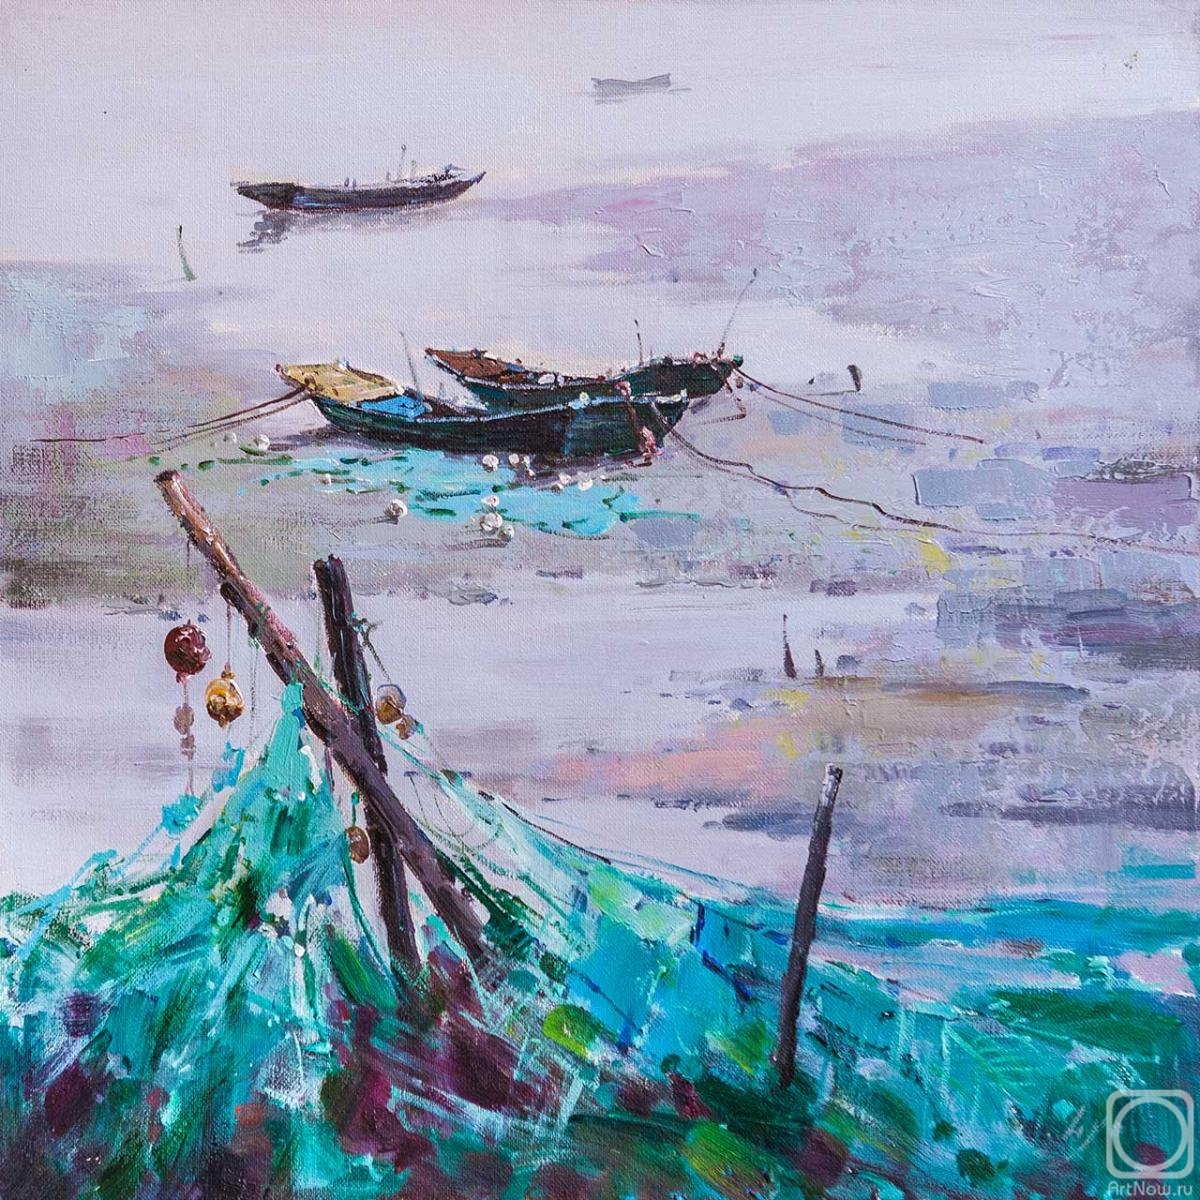 Gomes Liya. Landscape with fishing boats in turquoise colors